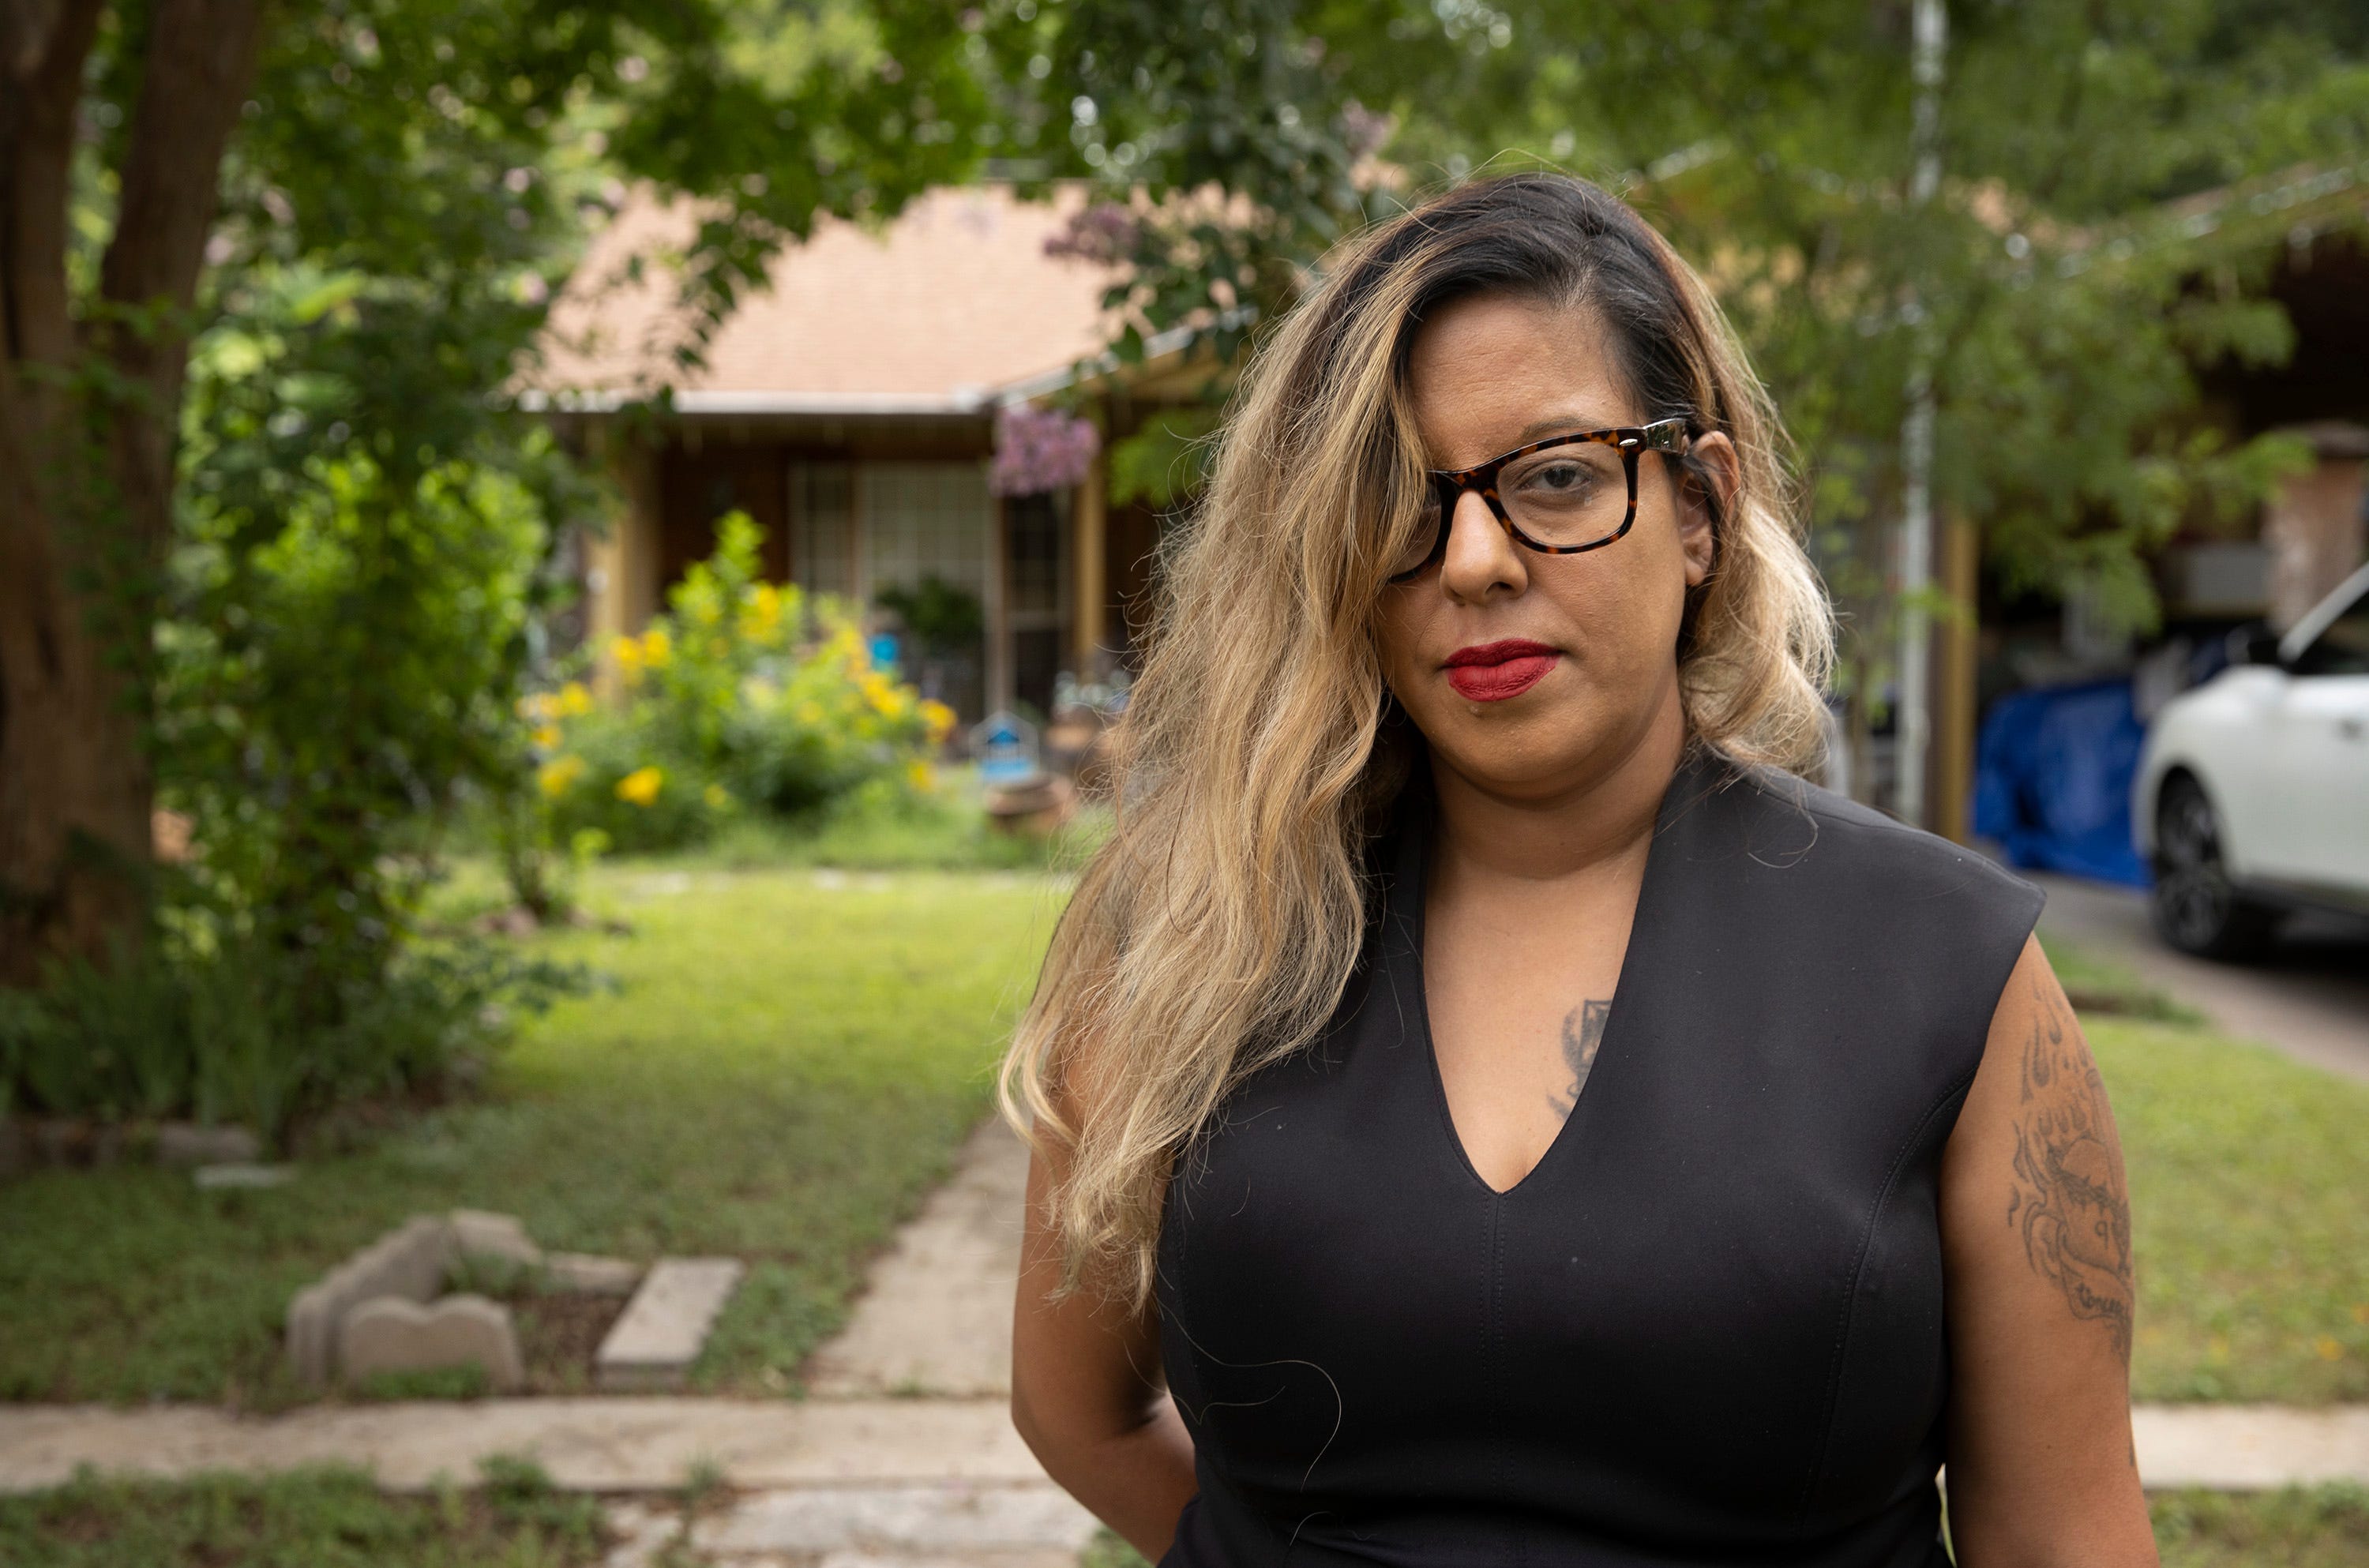 Bertha Rendon Delgado, president of the East Town Lake Citizens Neighborhood Association, is concerned about the city's decision to cancel three cadet classes and strip certain operations, such as 911 dispatch, from the Austin Police Department.